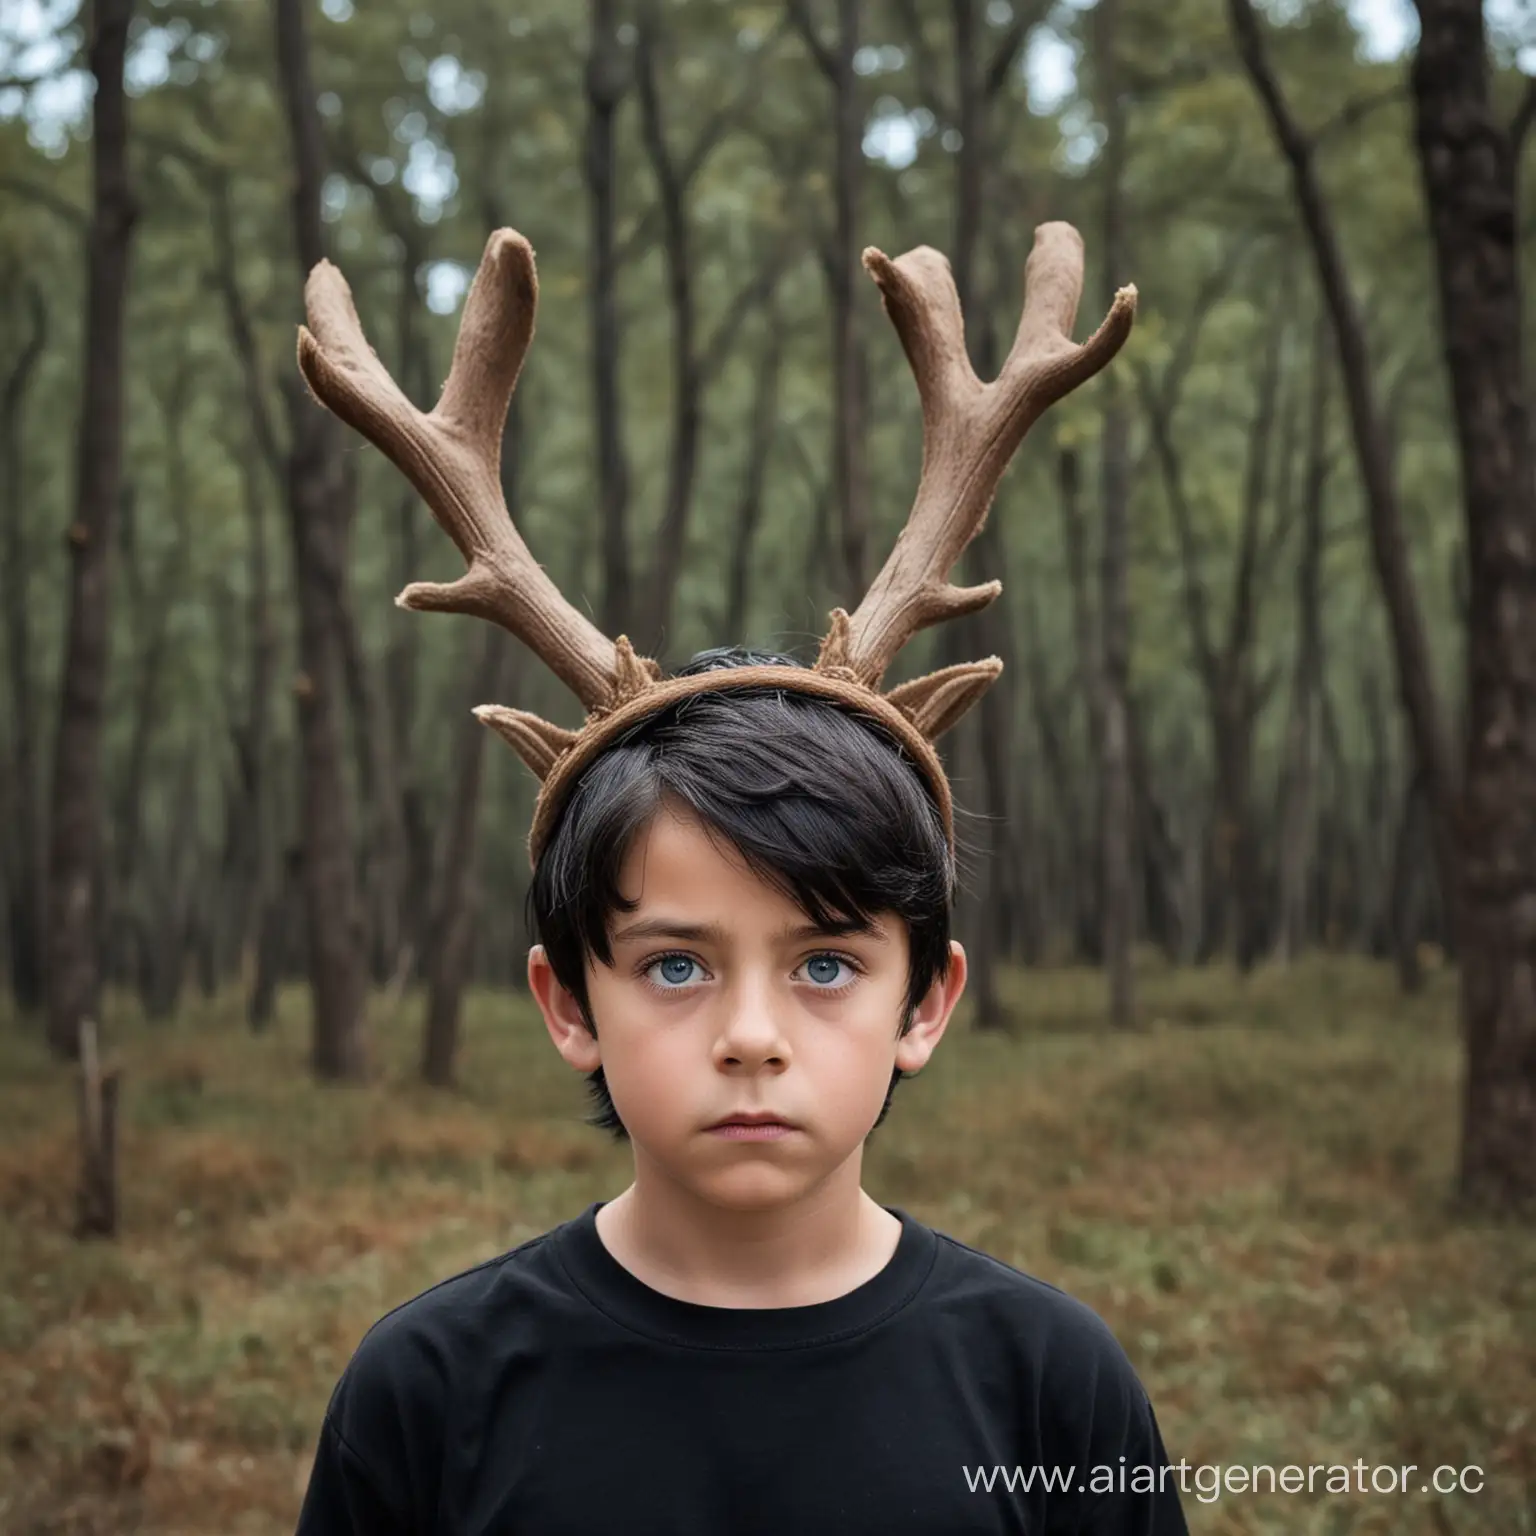 Portrait-of-Serious-Boy-with-Blue-Eyes-and-Reindeer-Antlers-in-Nature